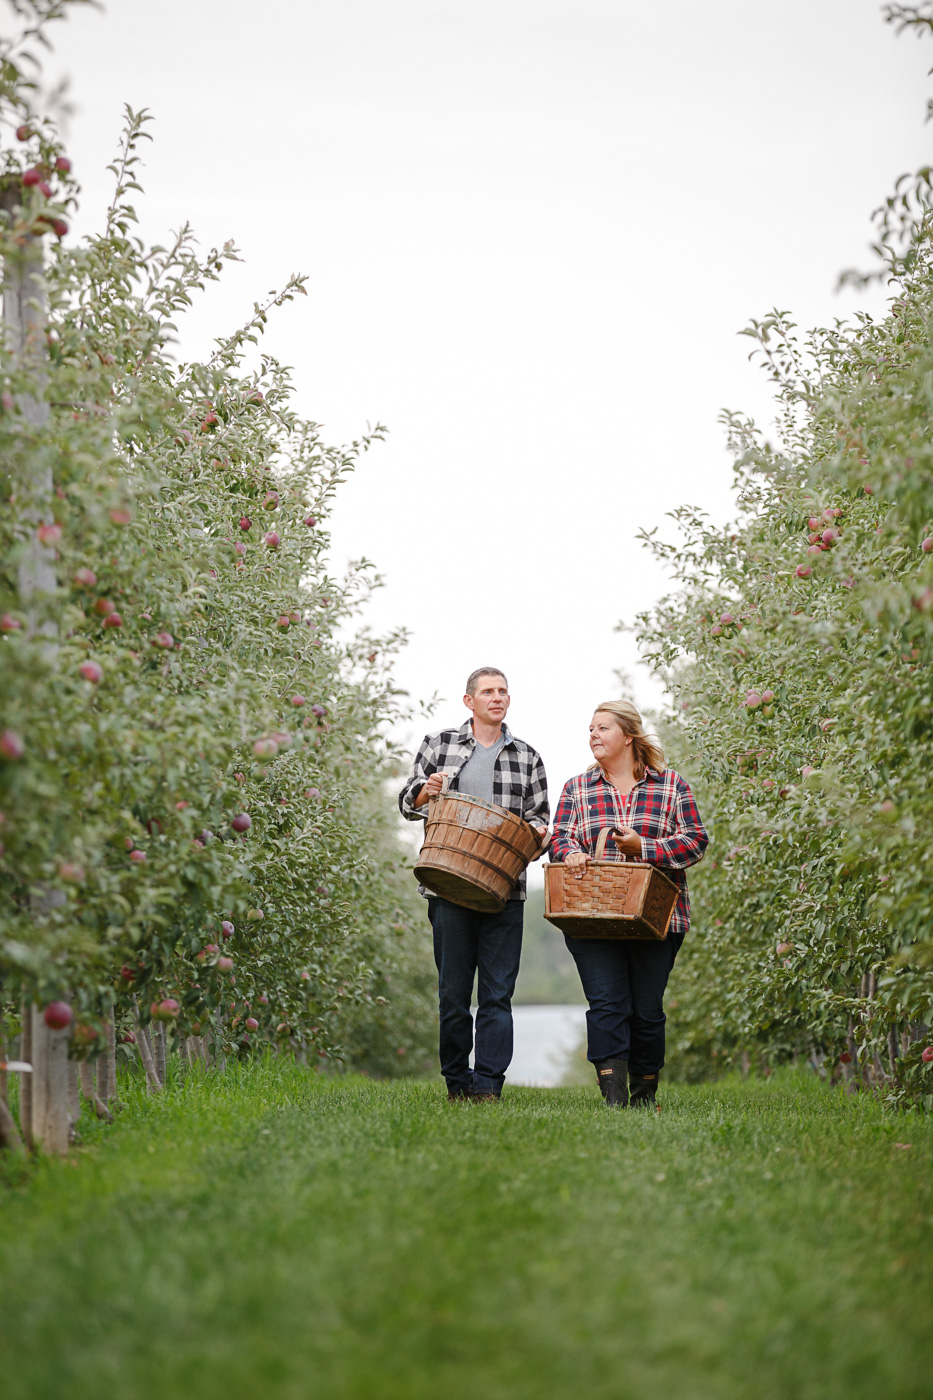 Jennifer and Joseph Fahey walk down a row of trees in their Peck and Bushel organic orchard in Colgate, WI.